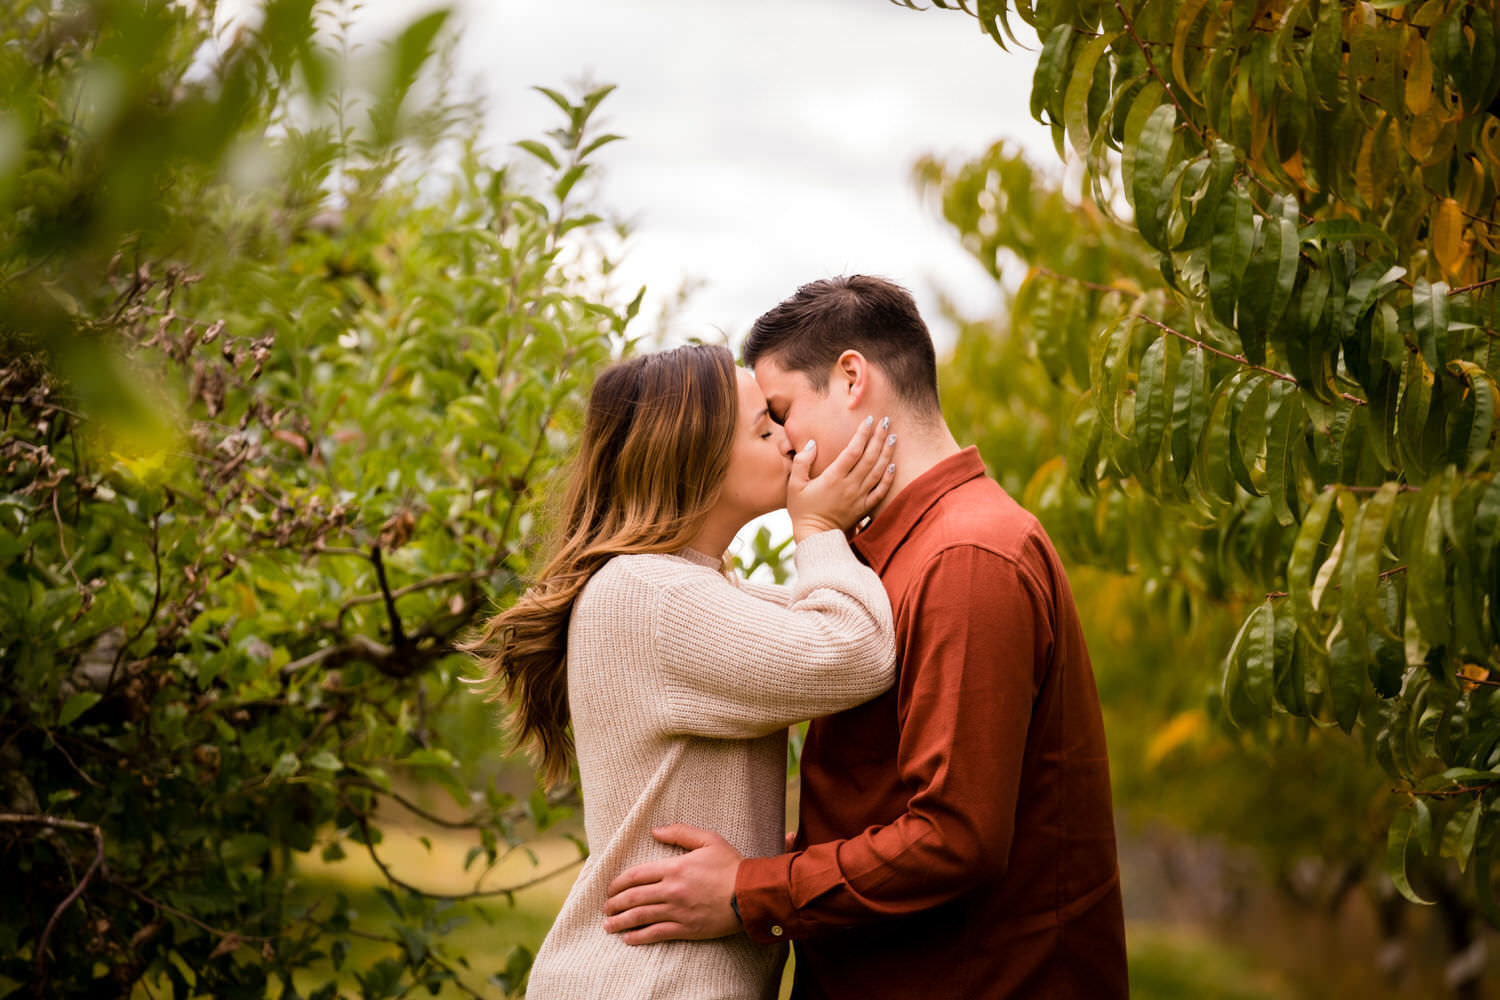 photographer proposal pittsburgh • Pittsburgh Surprise Proposal Photography | Engagement